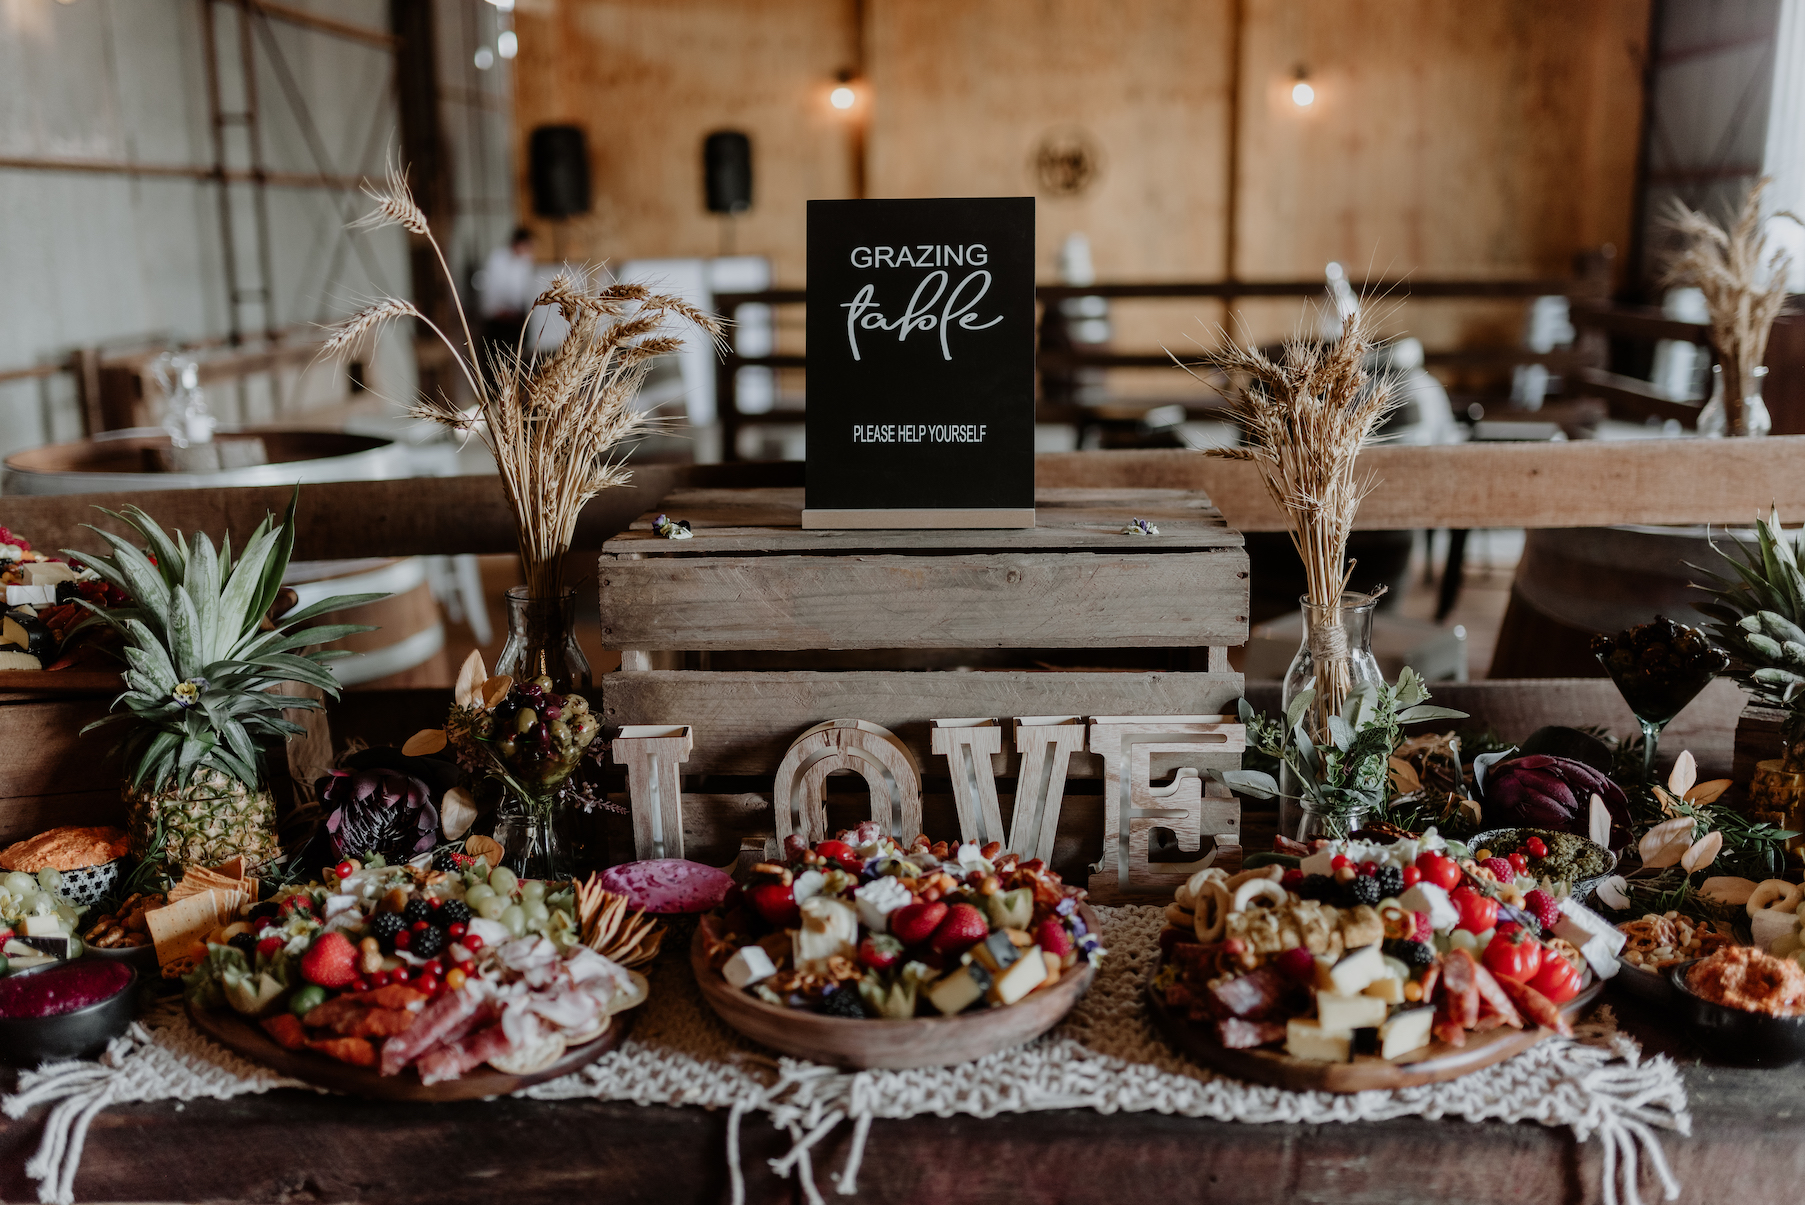 Redwing Farm, Yorke Peninsula Destination Wedding Venue in the South Australian Countryside suitable for ceremony and reception with accommodation on site.